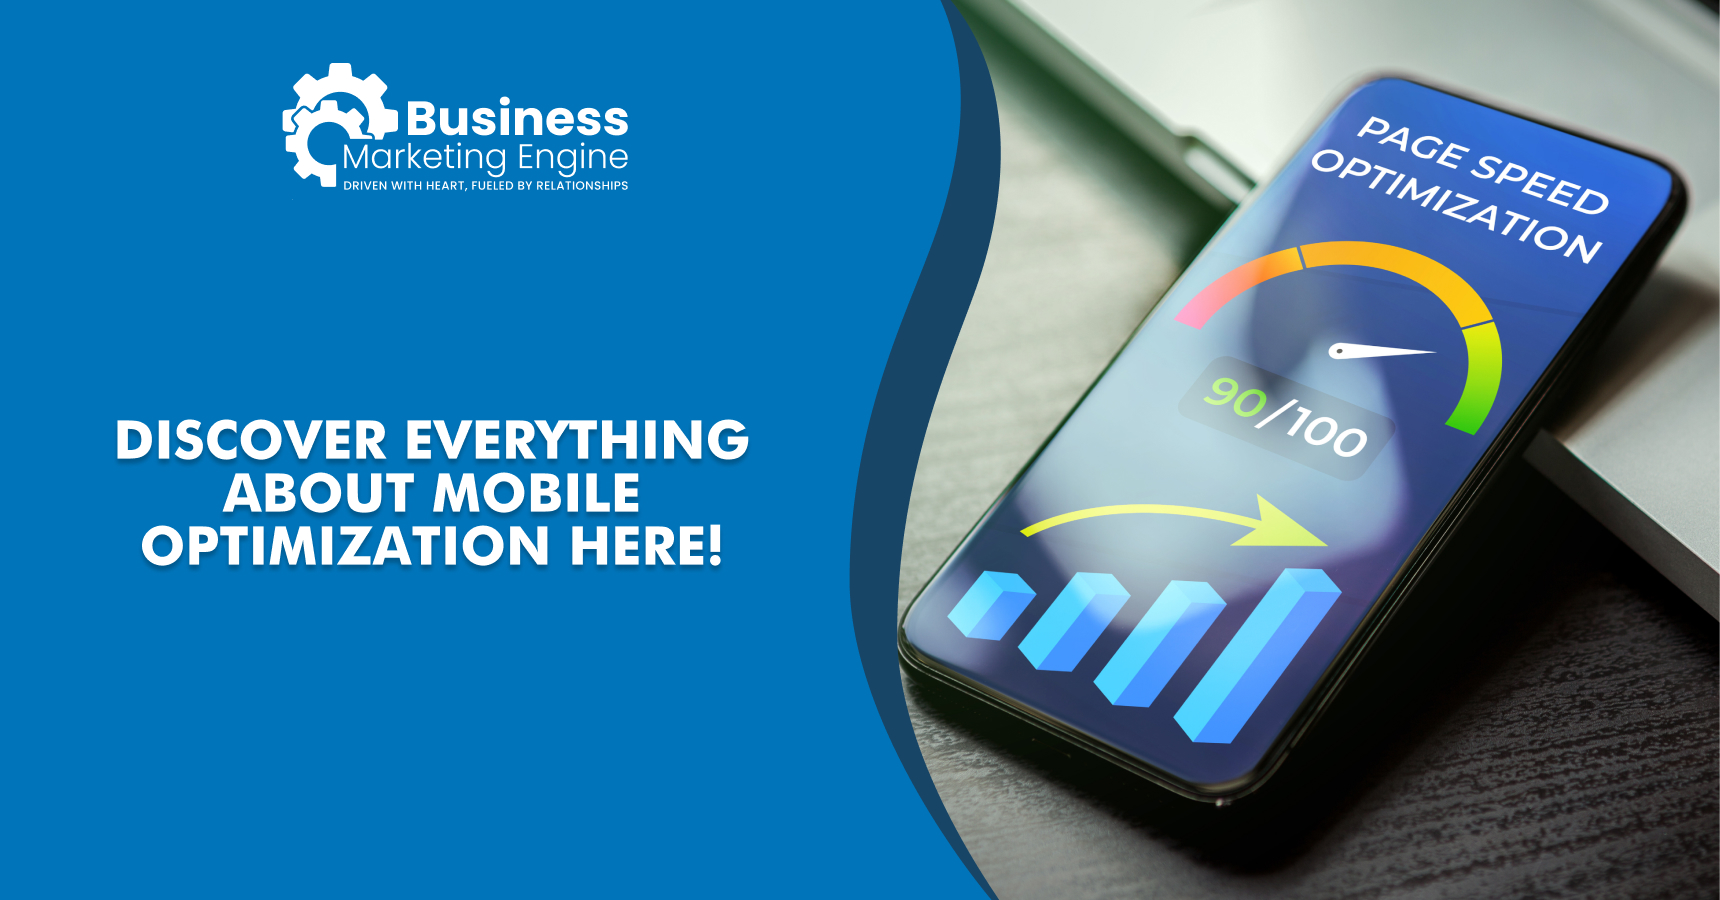 Discover everything about mobile optimization here